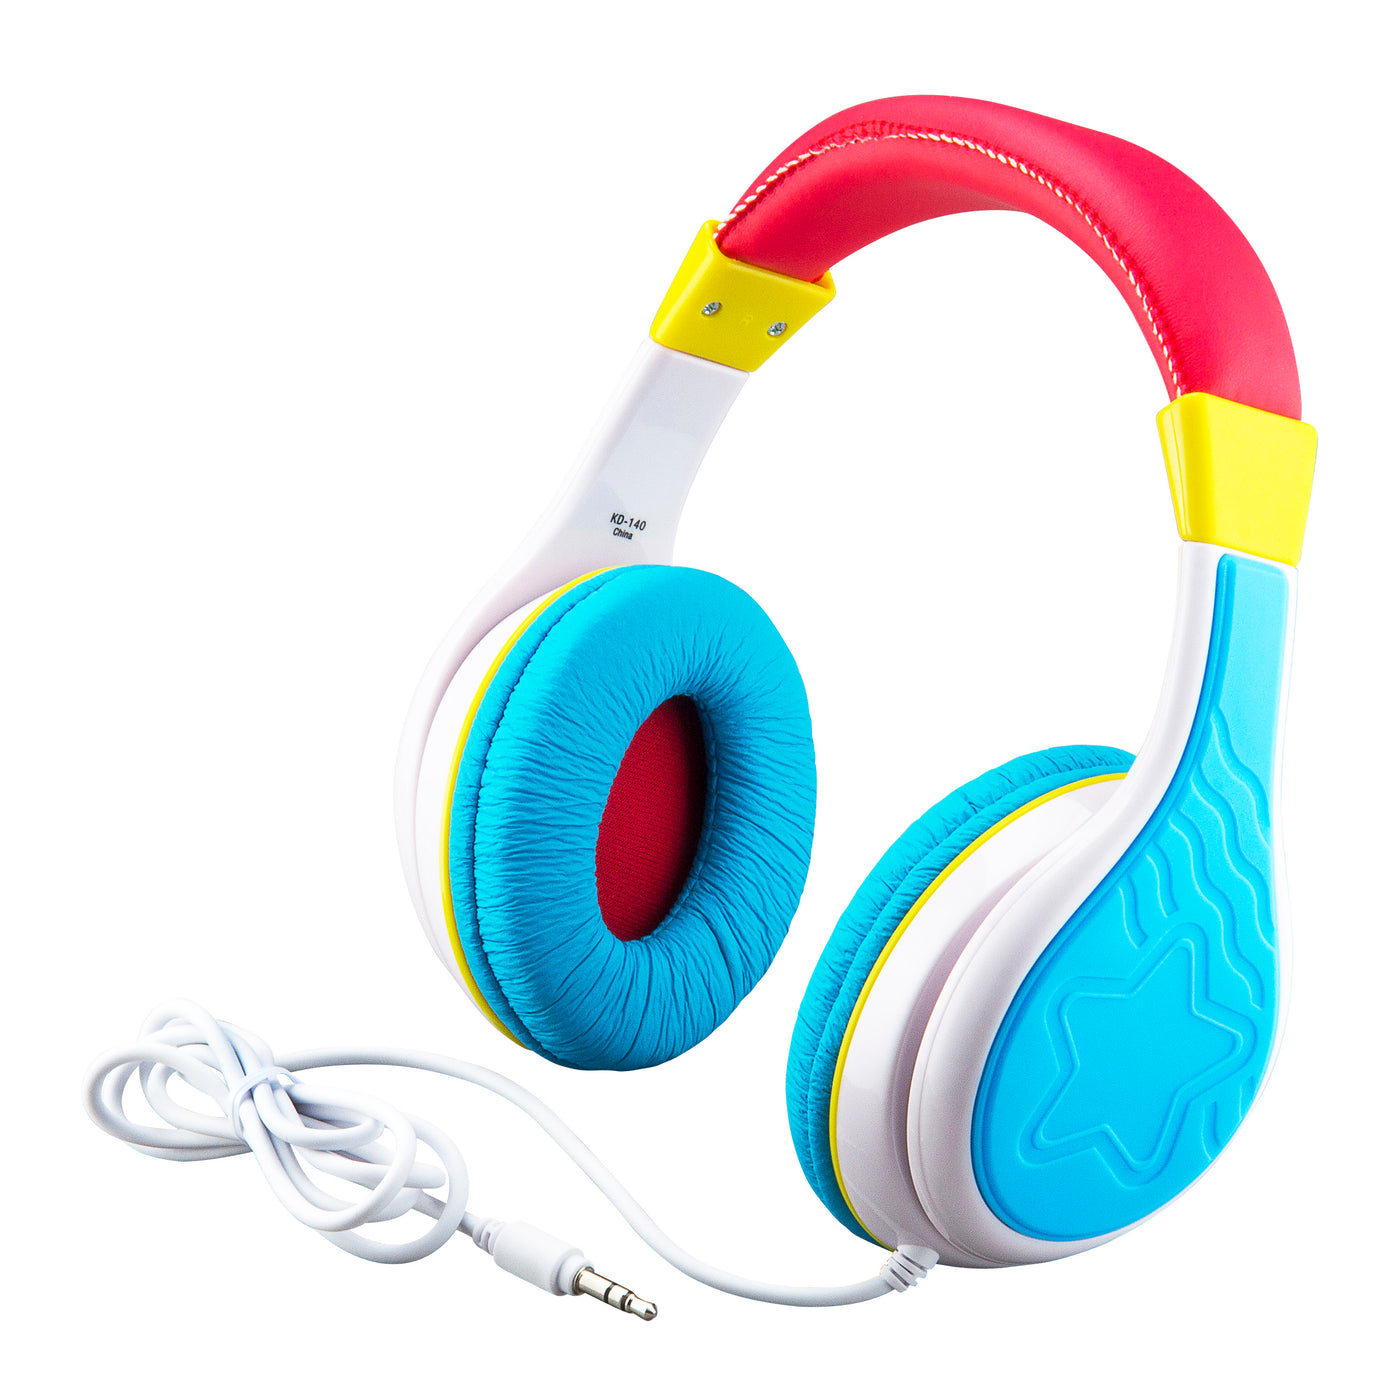 Wired Headphones for Kids - Multicolored